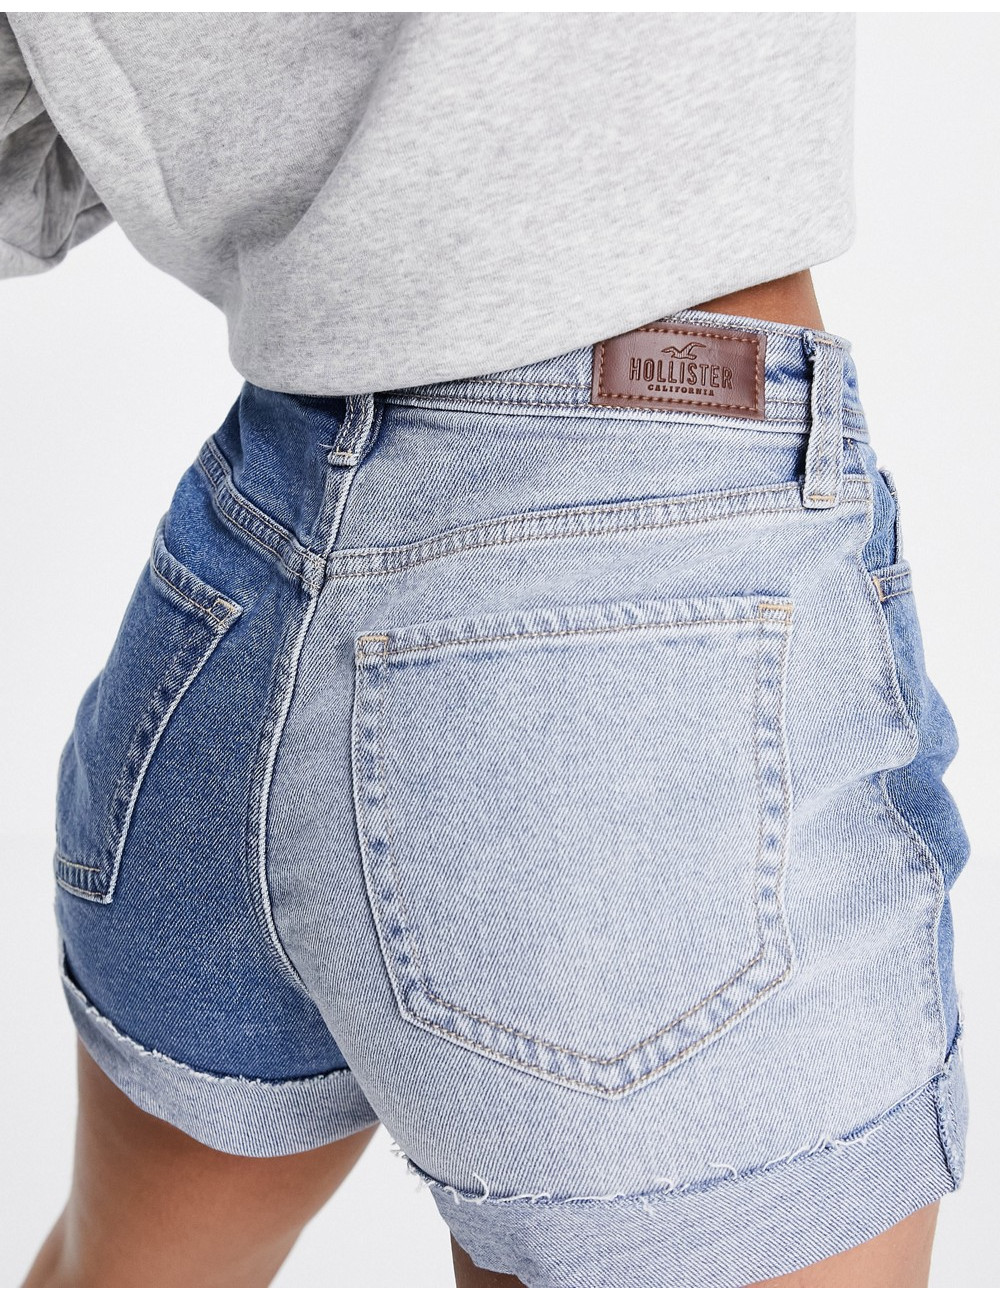 Hollister two tone shorts...